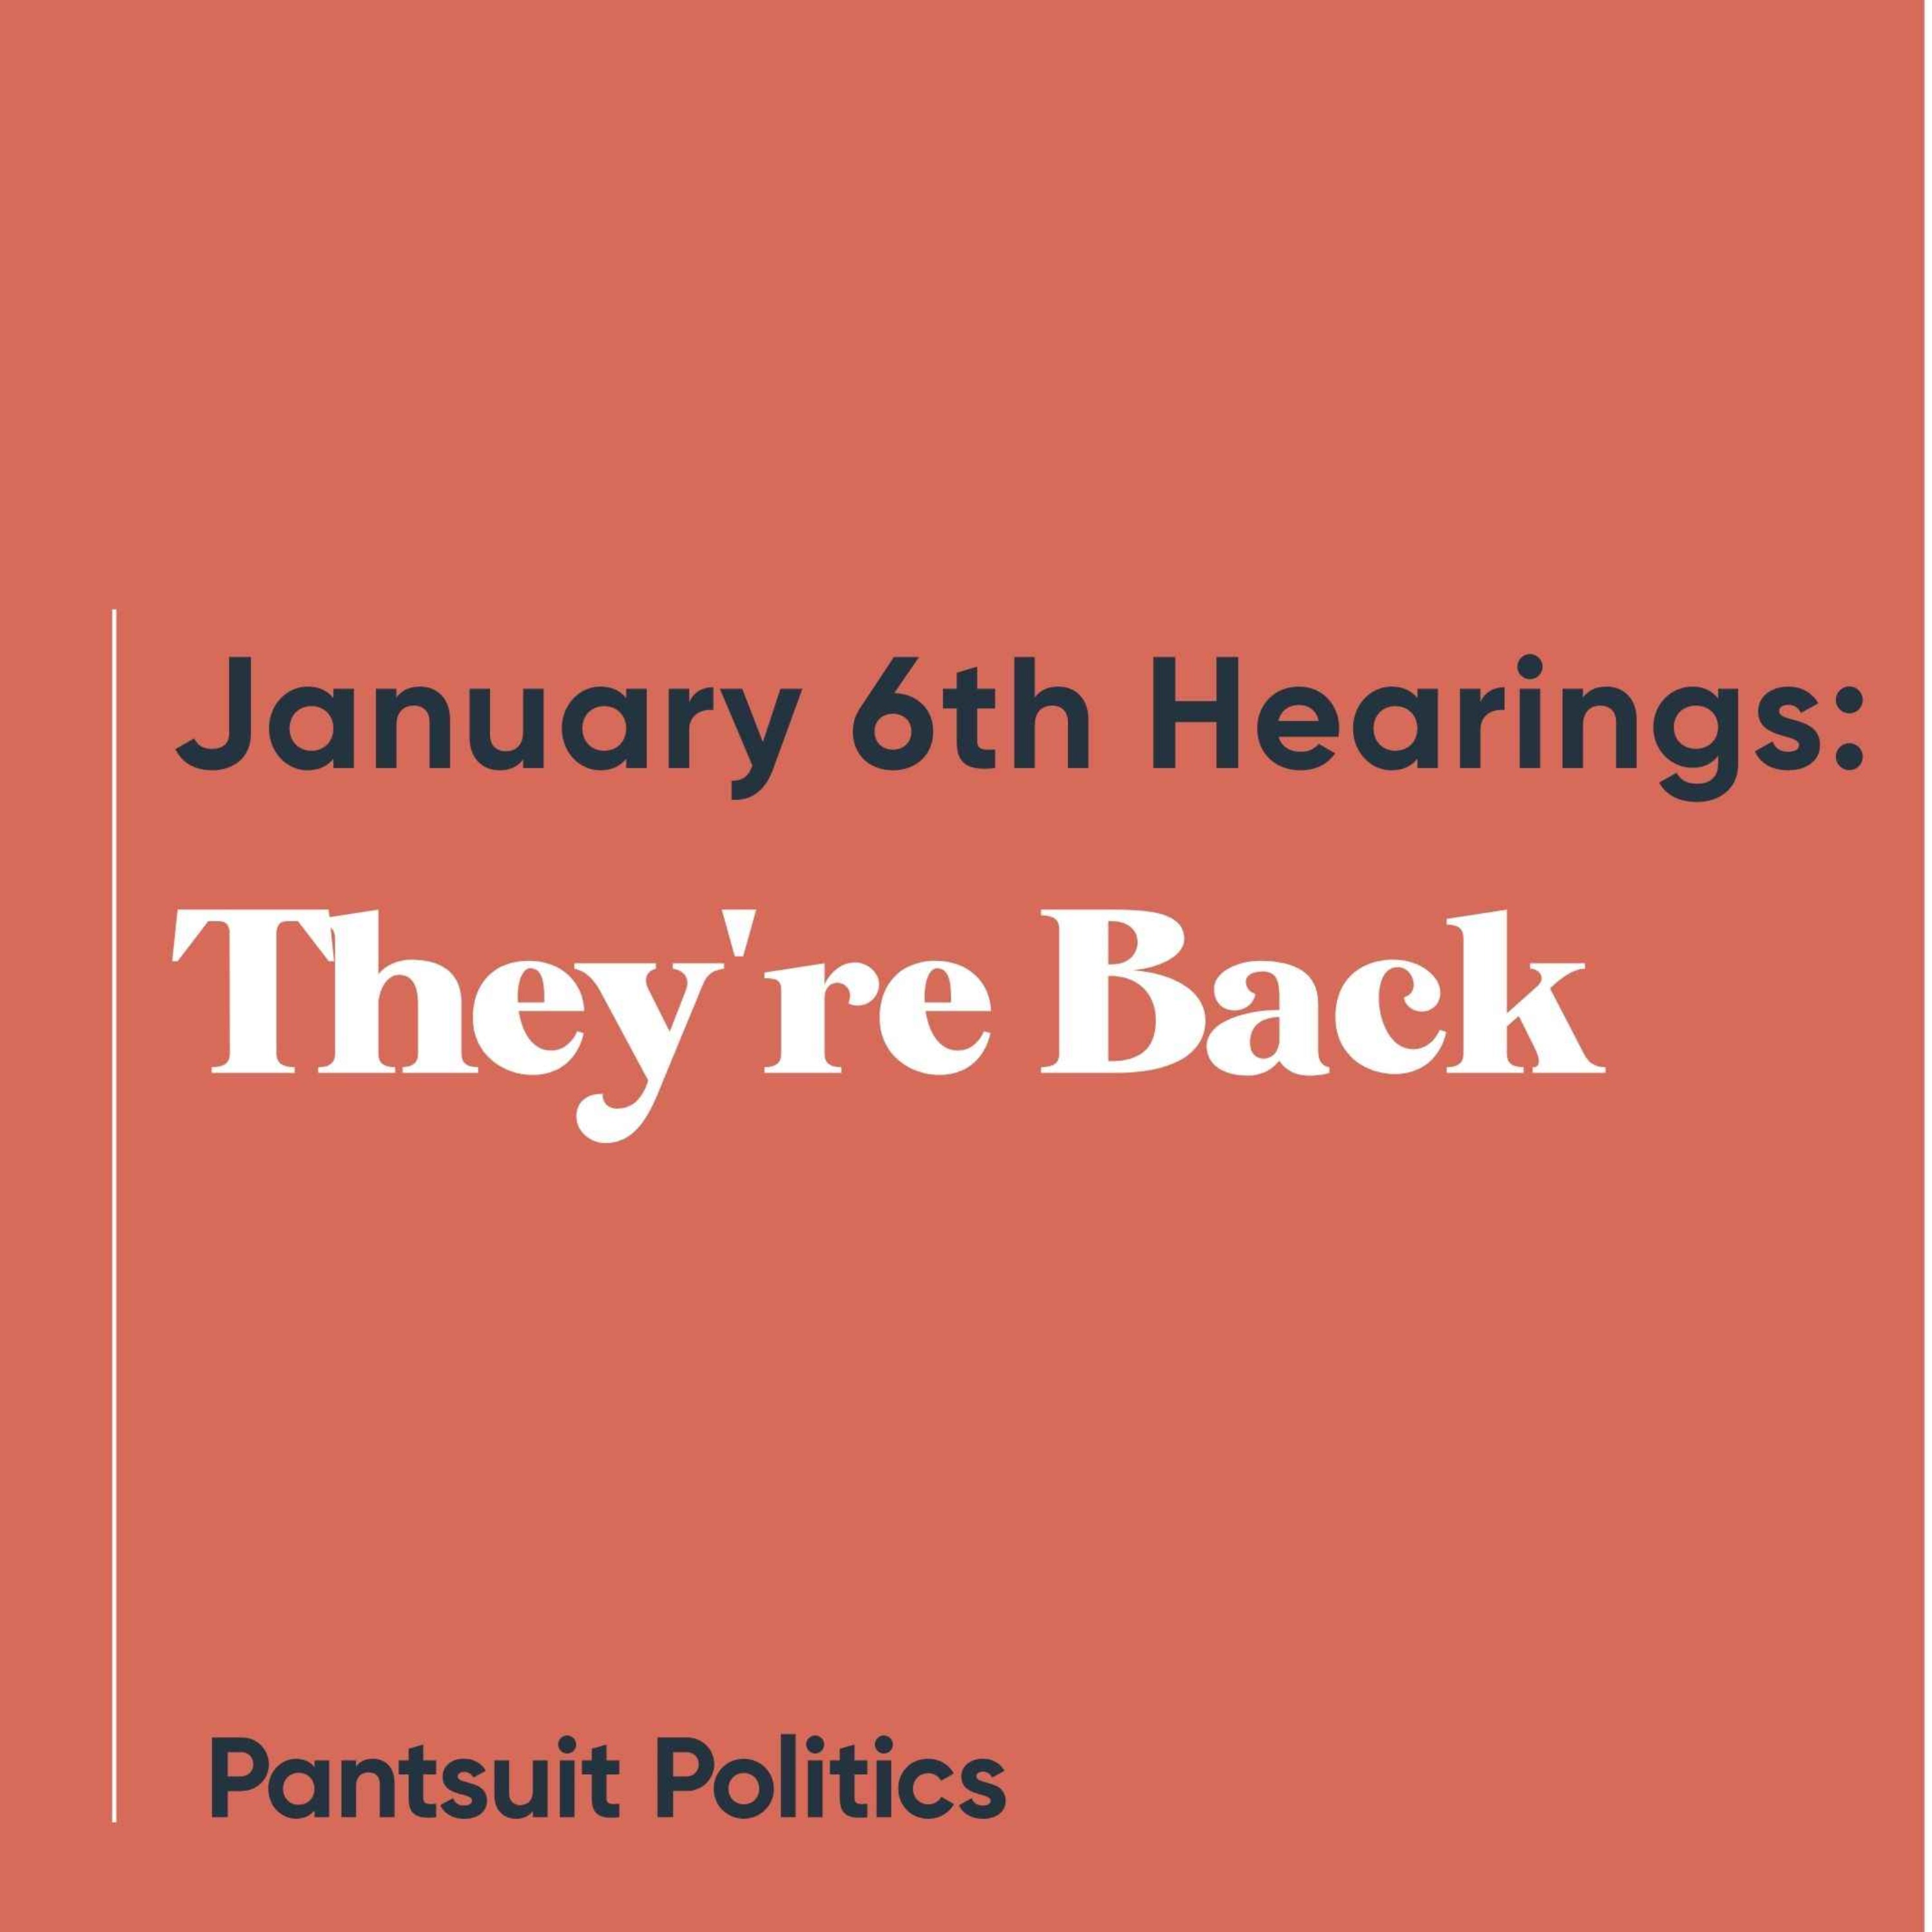 January 6th Hearings: They're Back